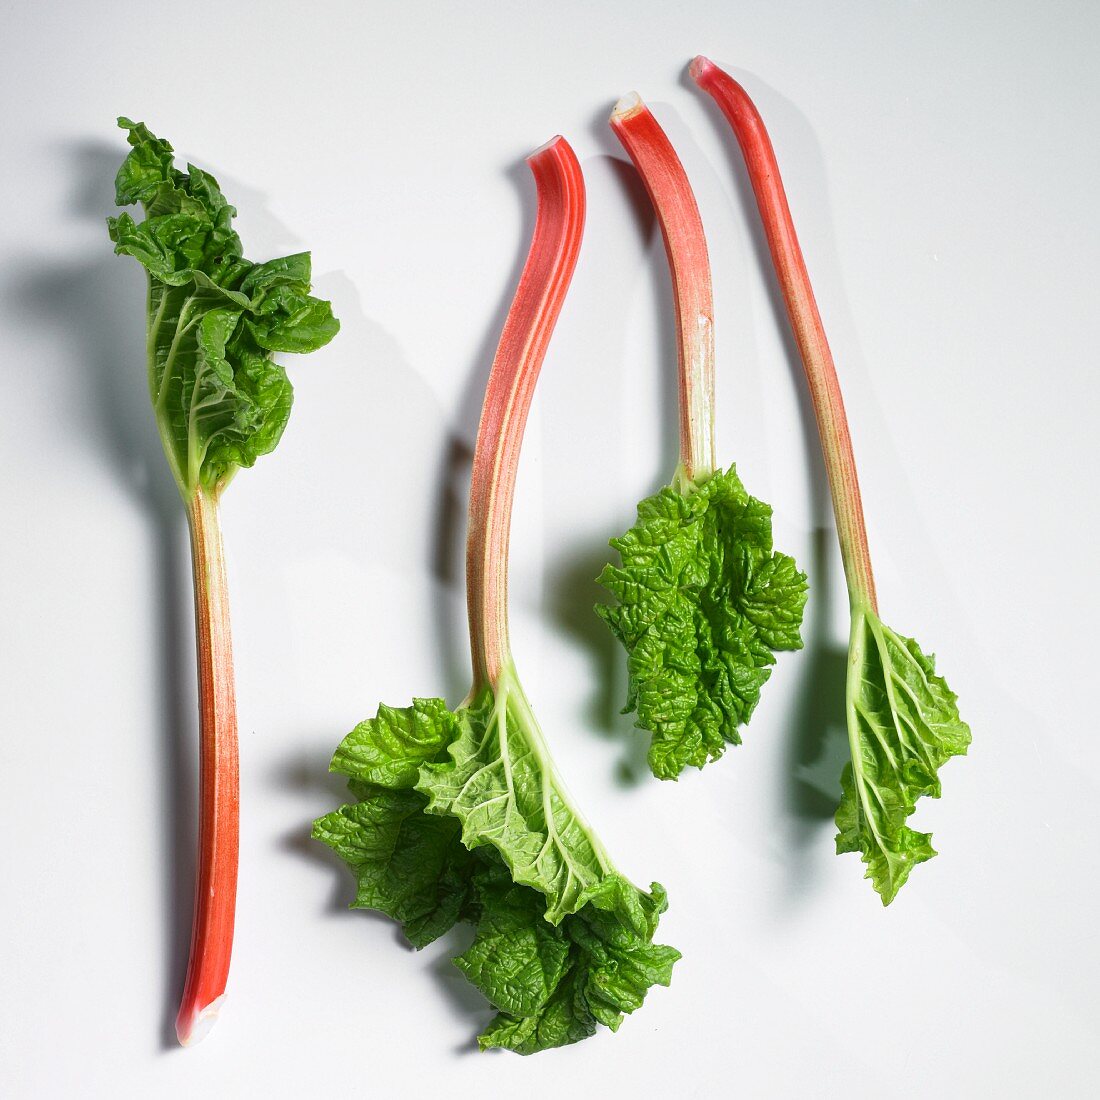 Four stalks of rhubarb with leaves